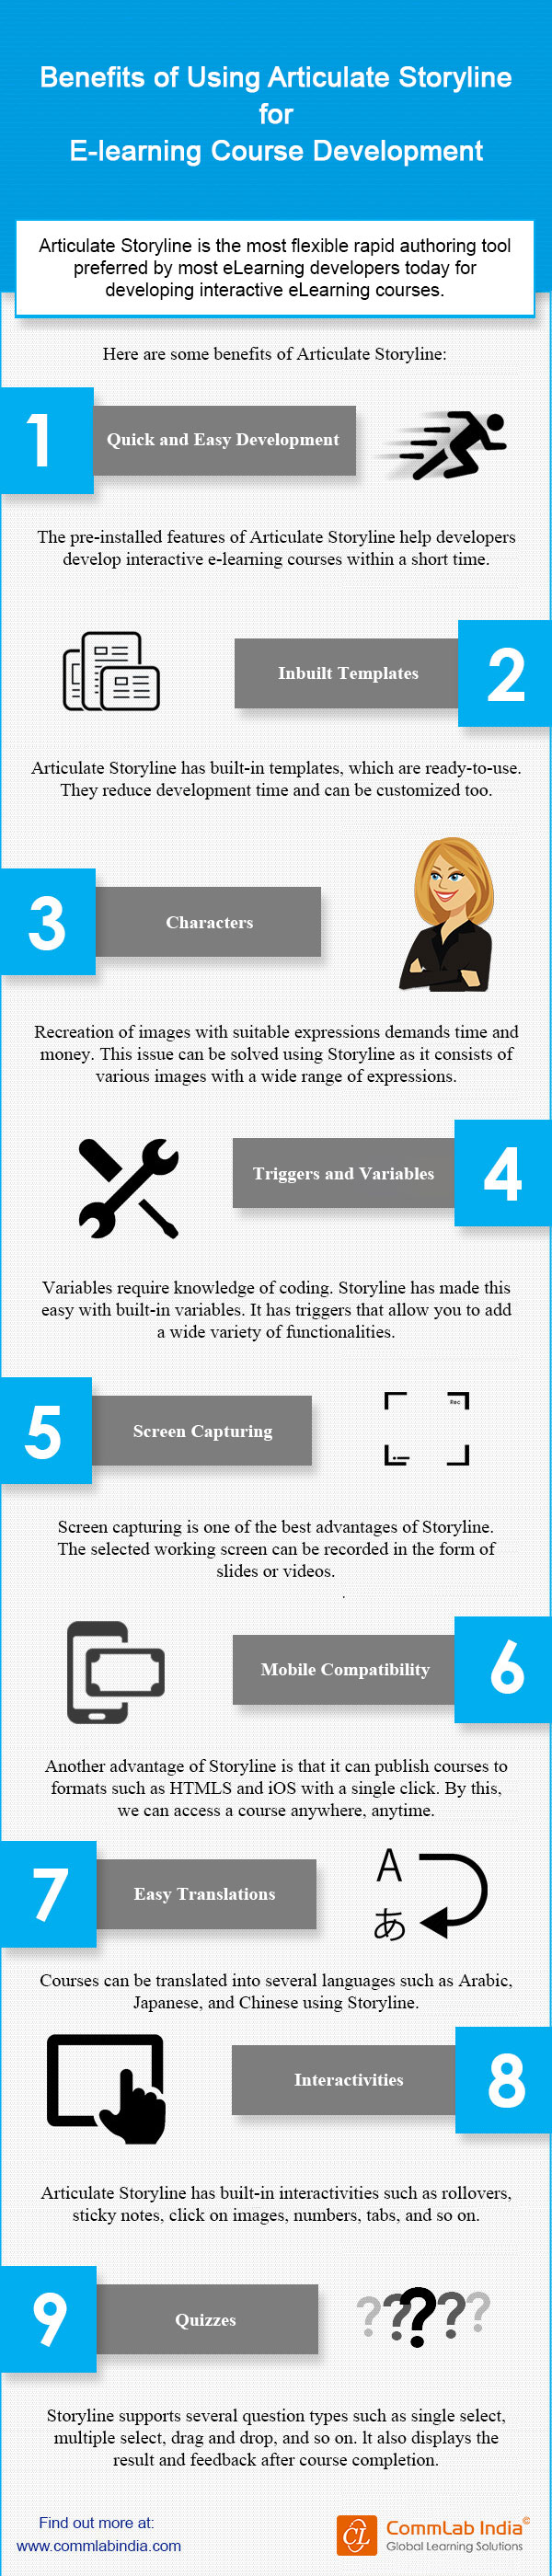 Benefits of Using Articulate Storyline for E-Learning Course Development[Infographic]